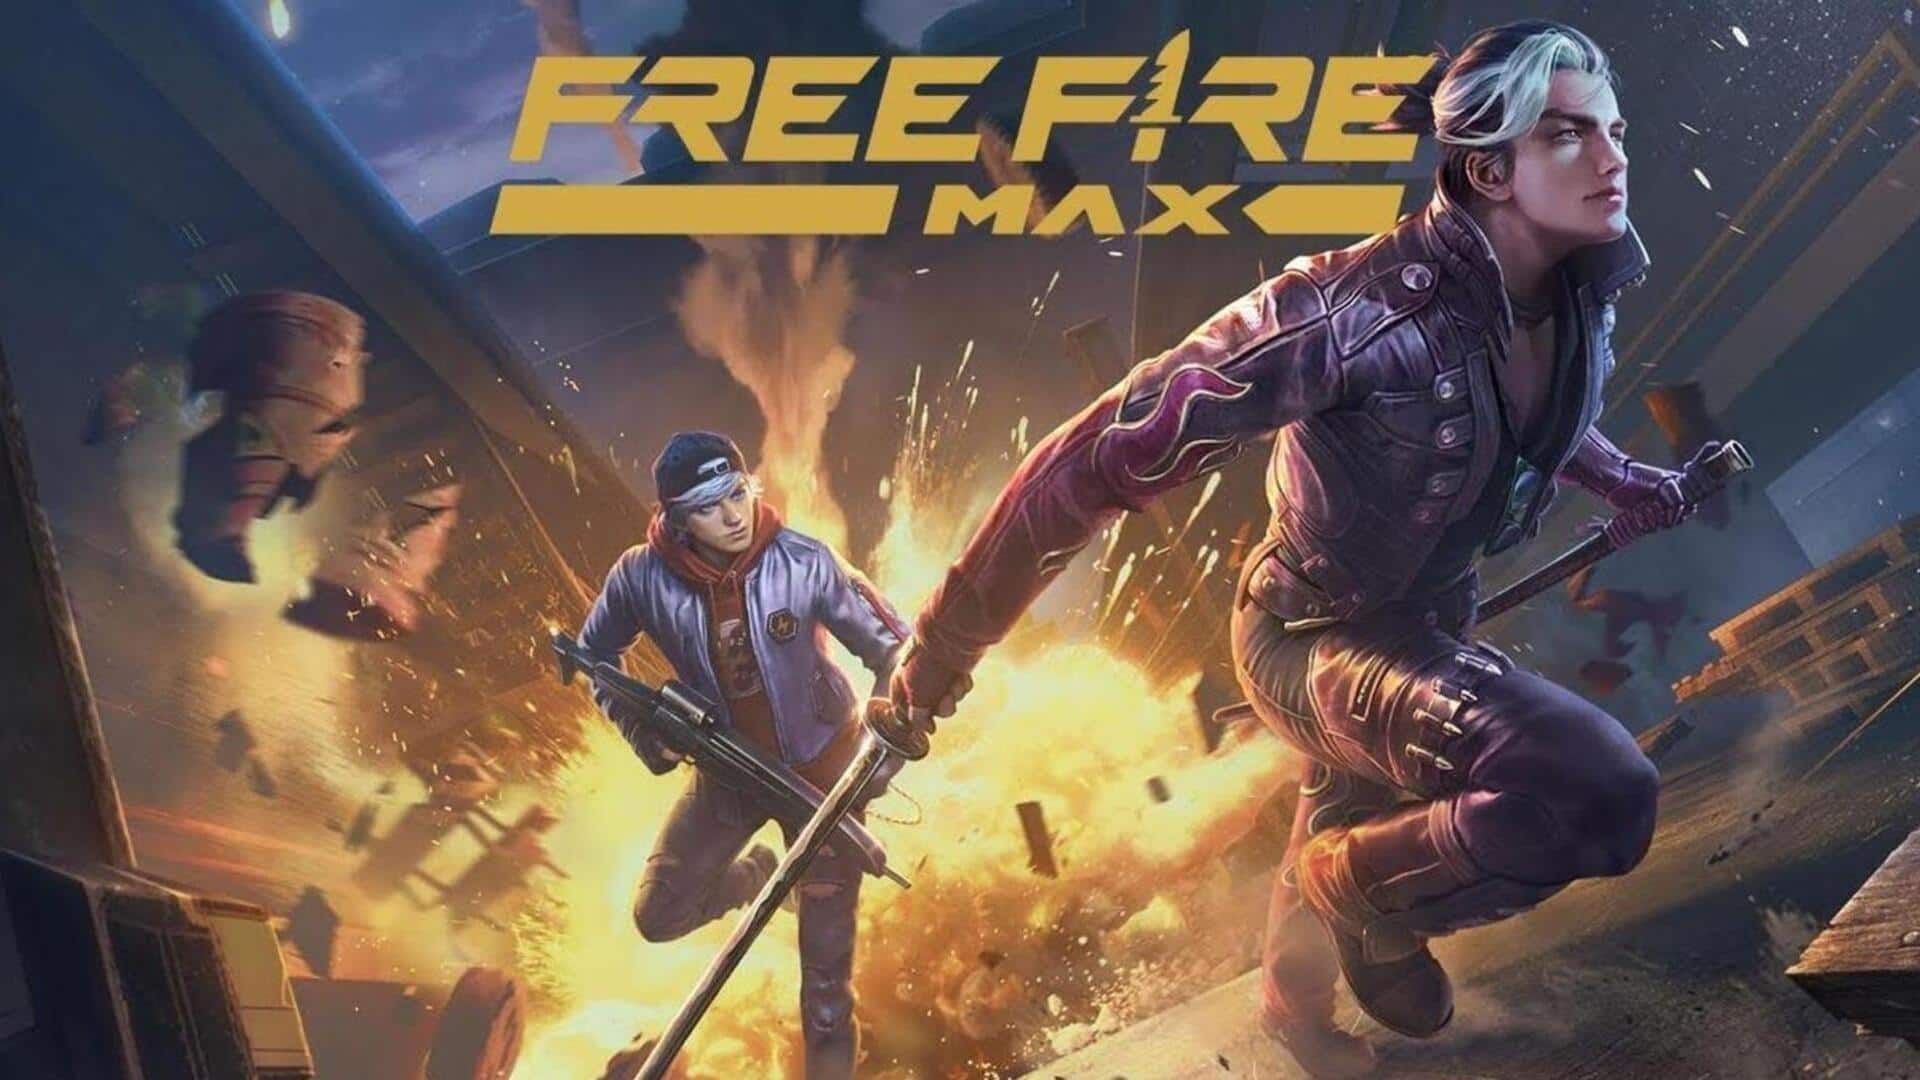 Garena Free Fire MAX redeem codes December 15 now available